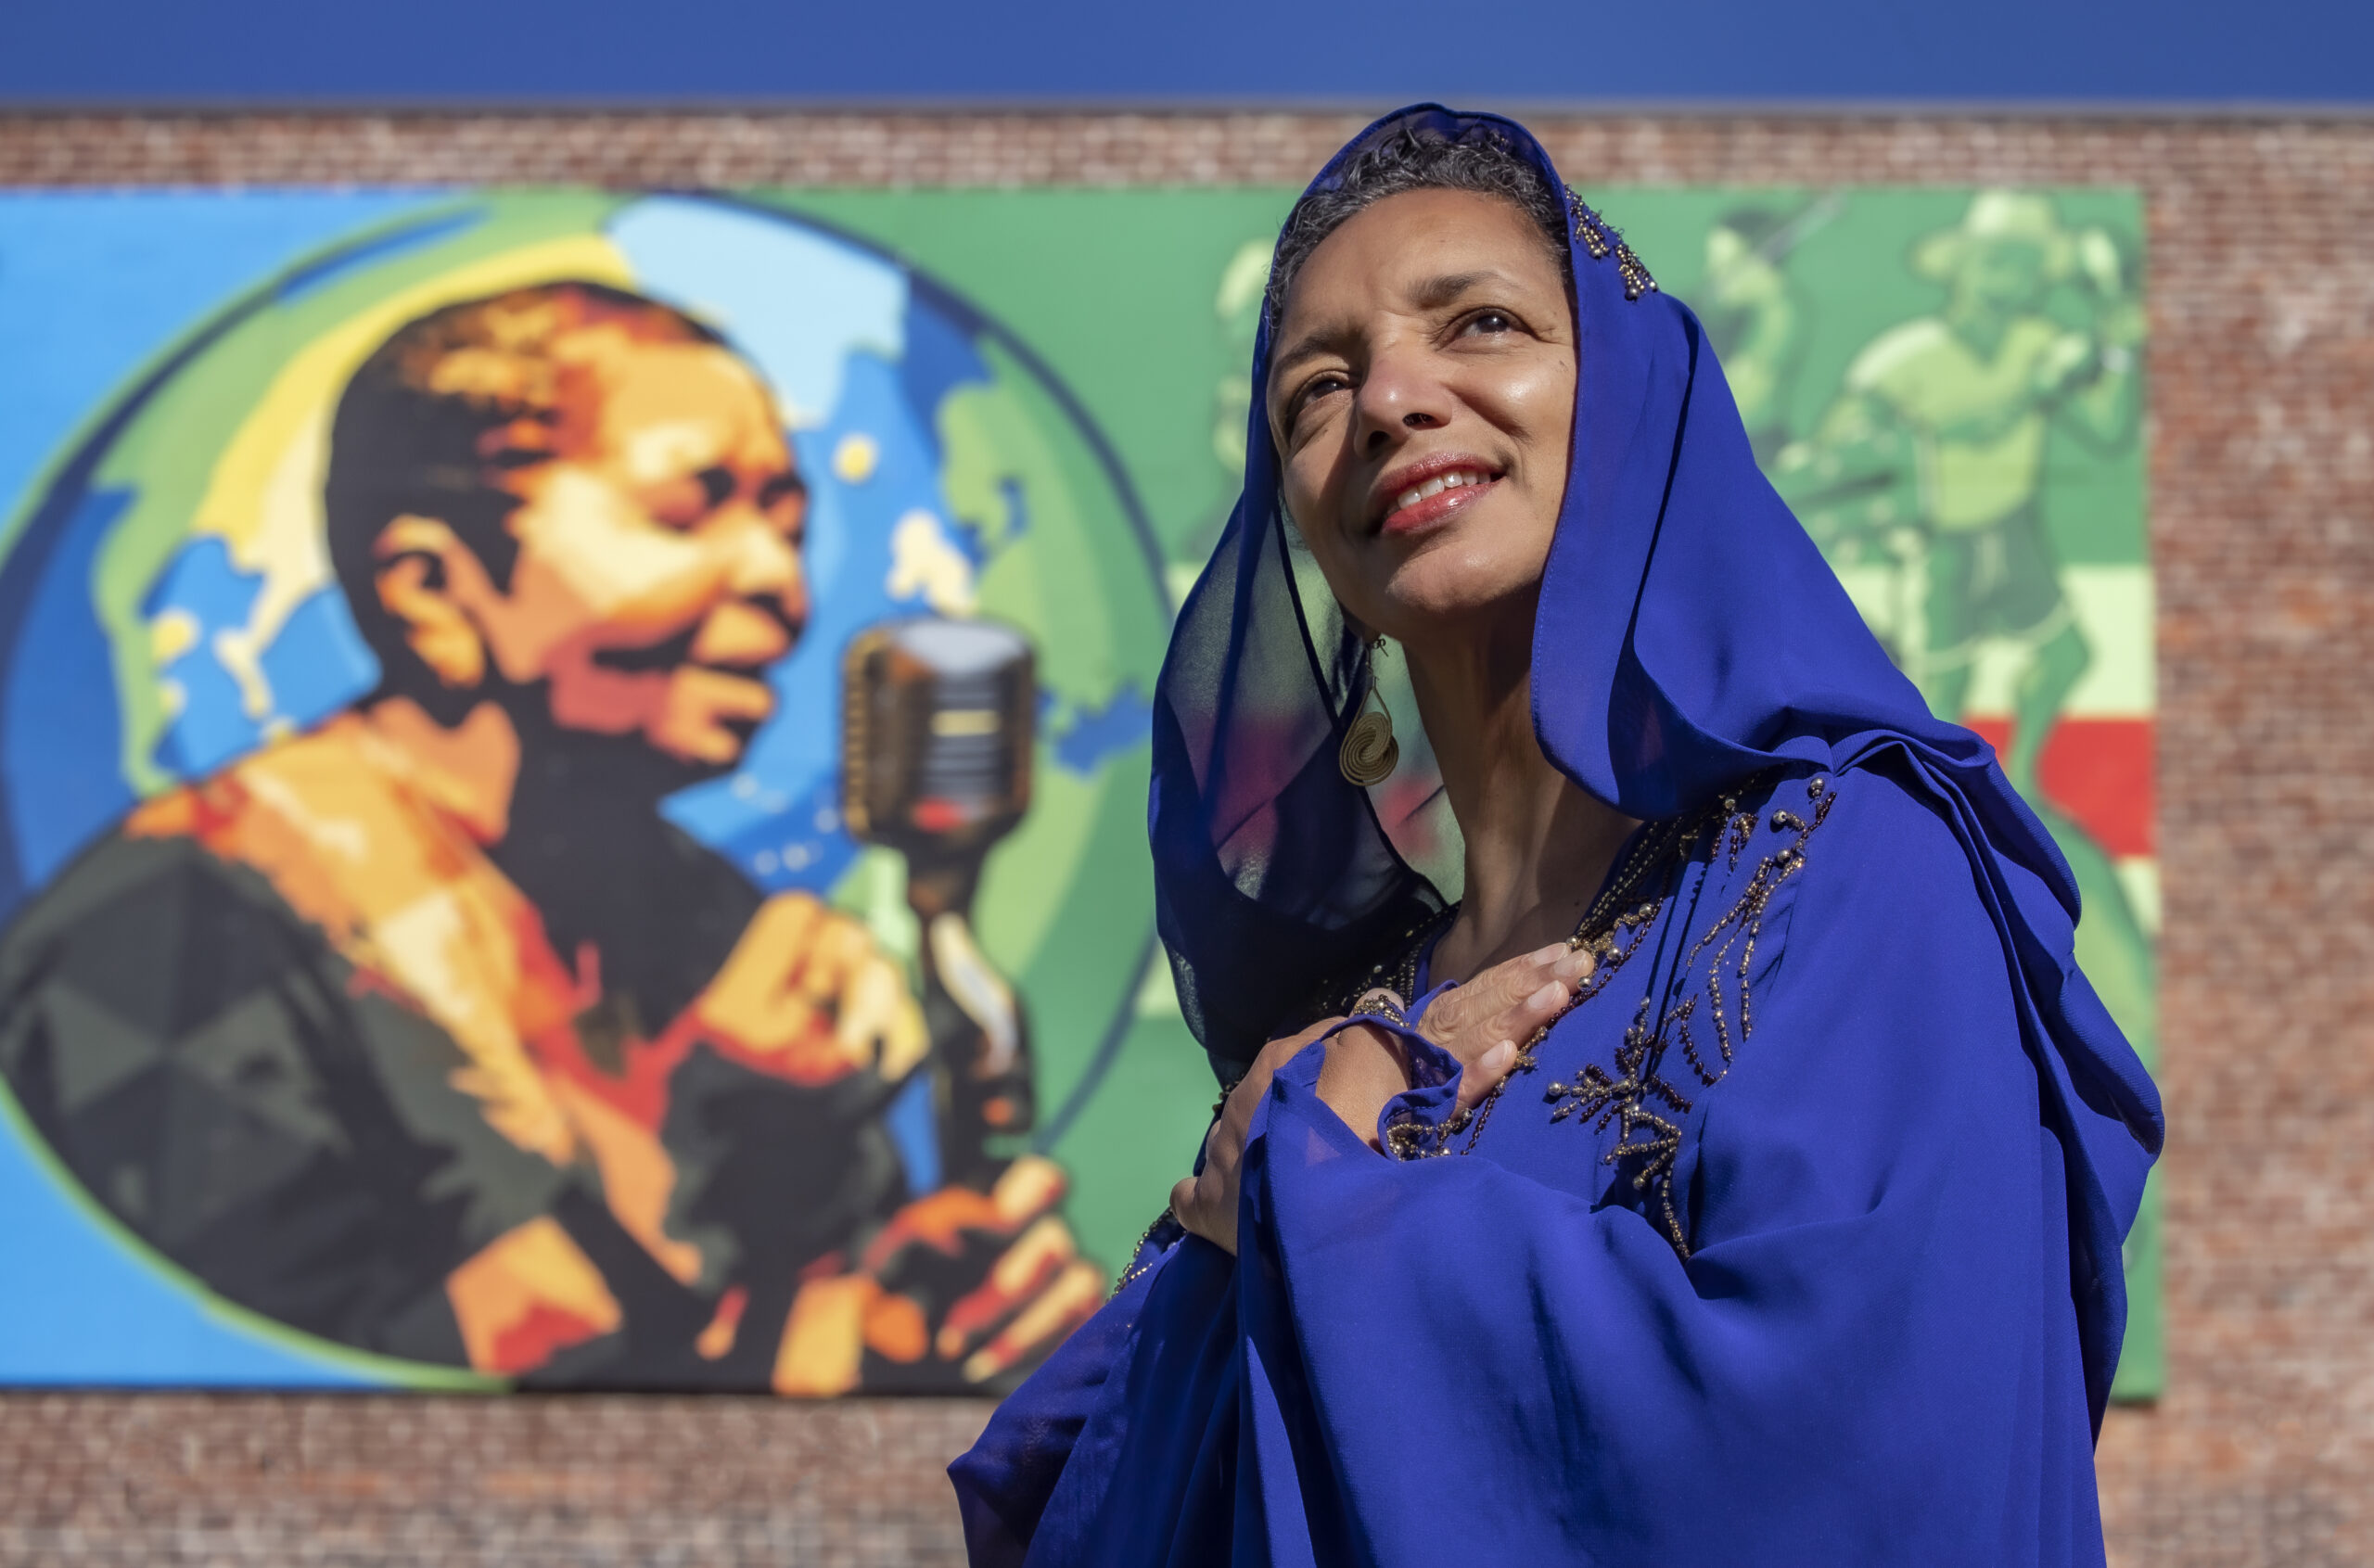 A woman in blue standing in front of a mural of a woman singing.